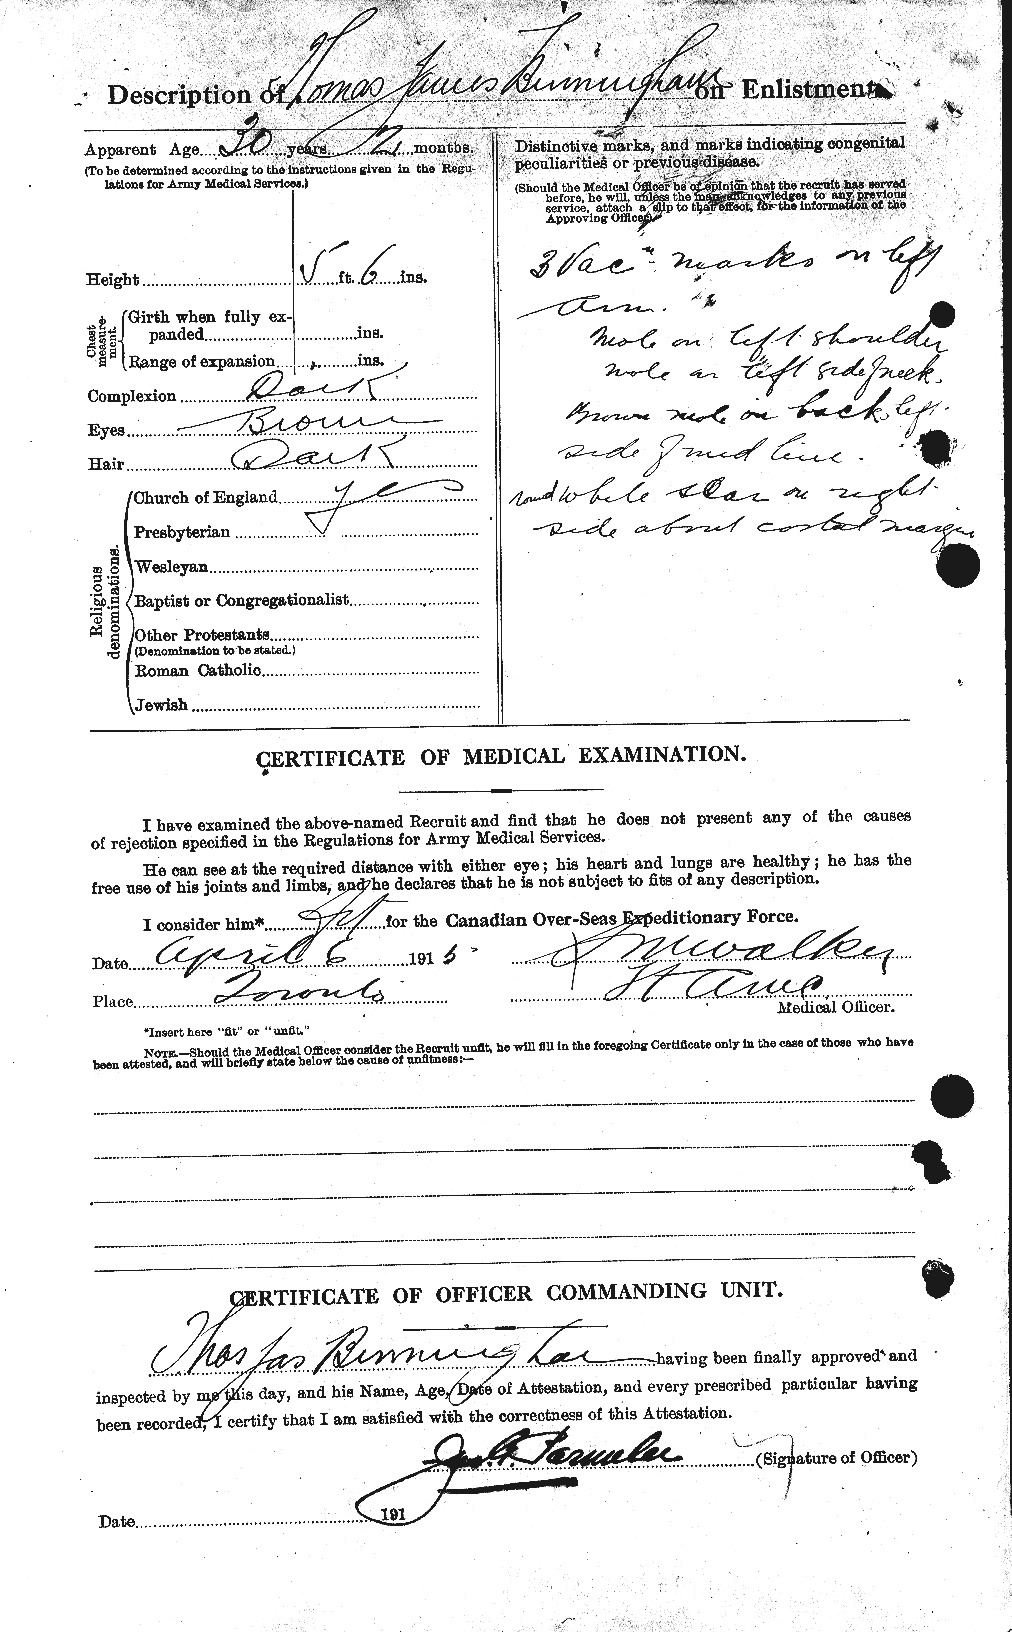 Personnel Records of the First World War - CEF 243945b